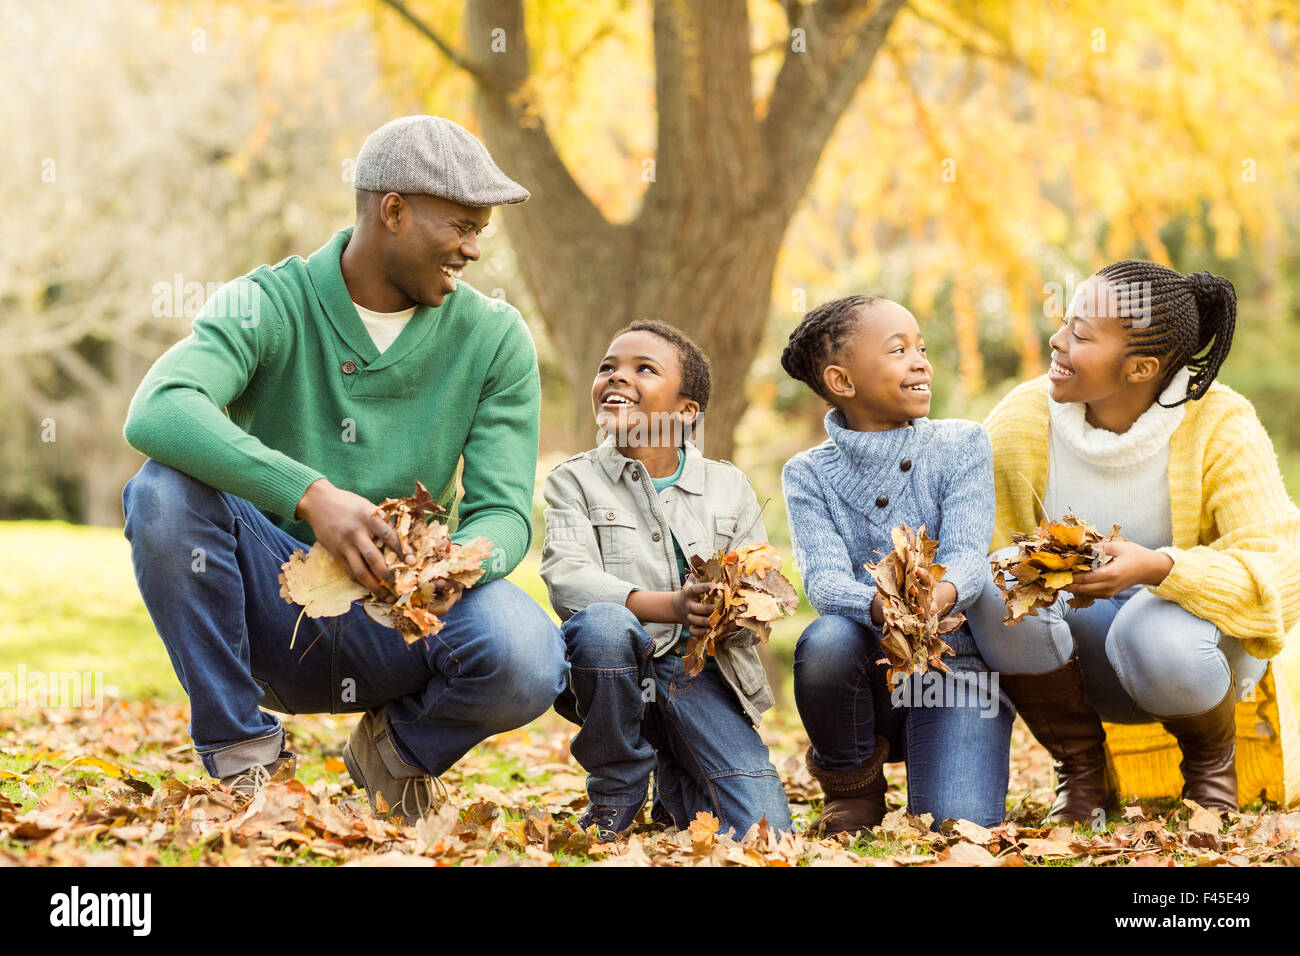 Portrait of young family holding leaves Stock Photo